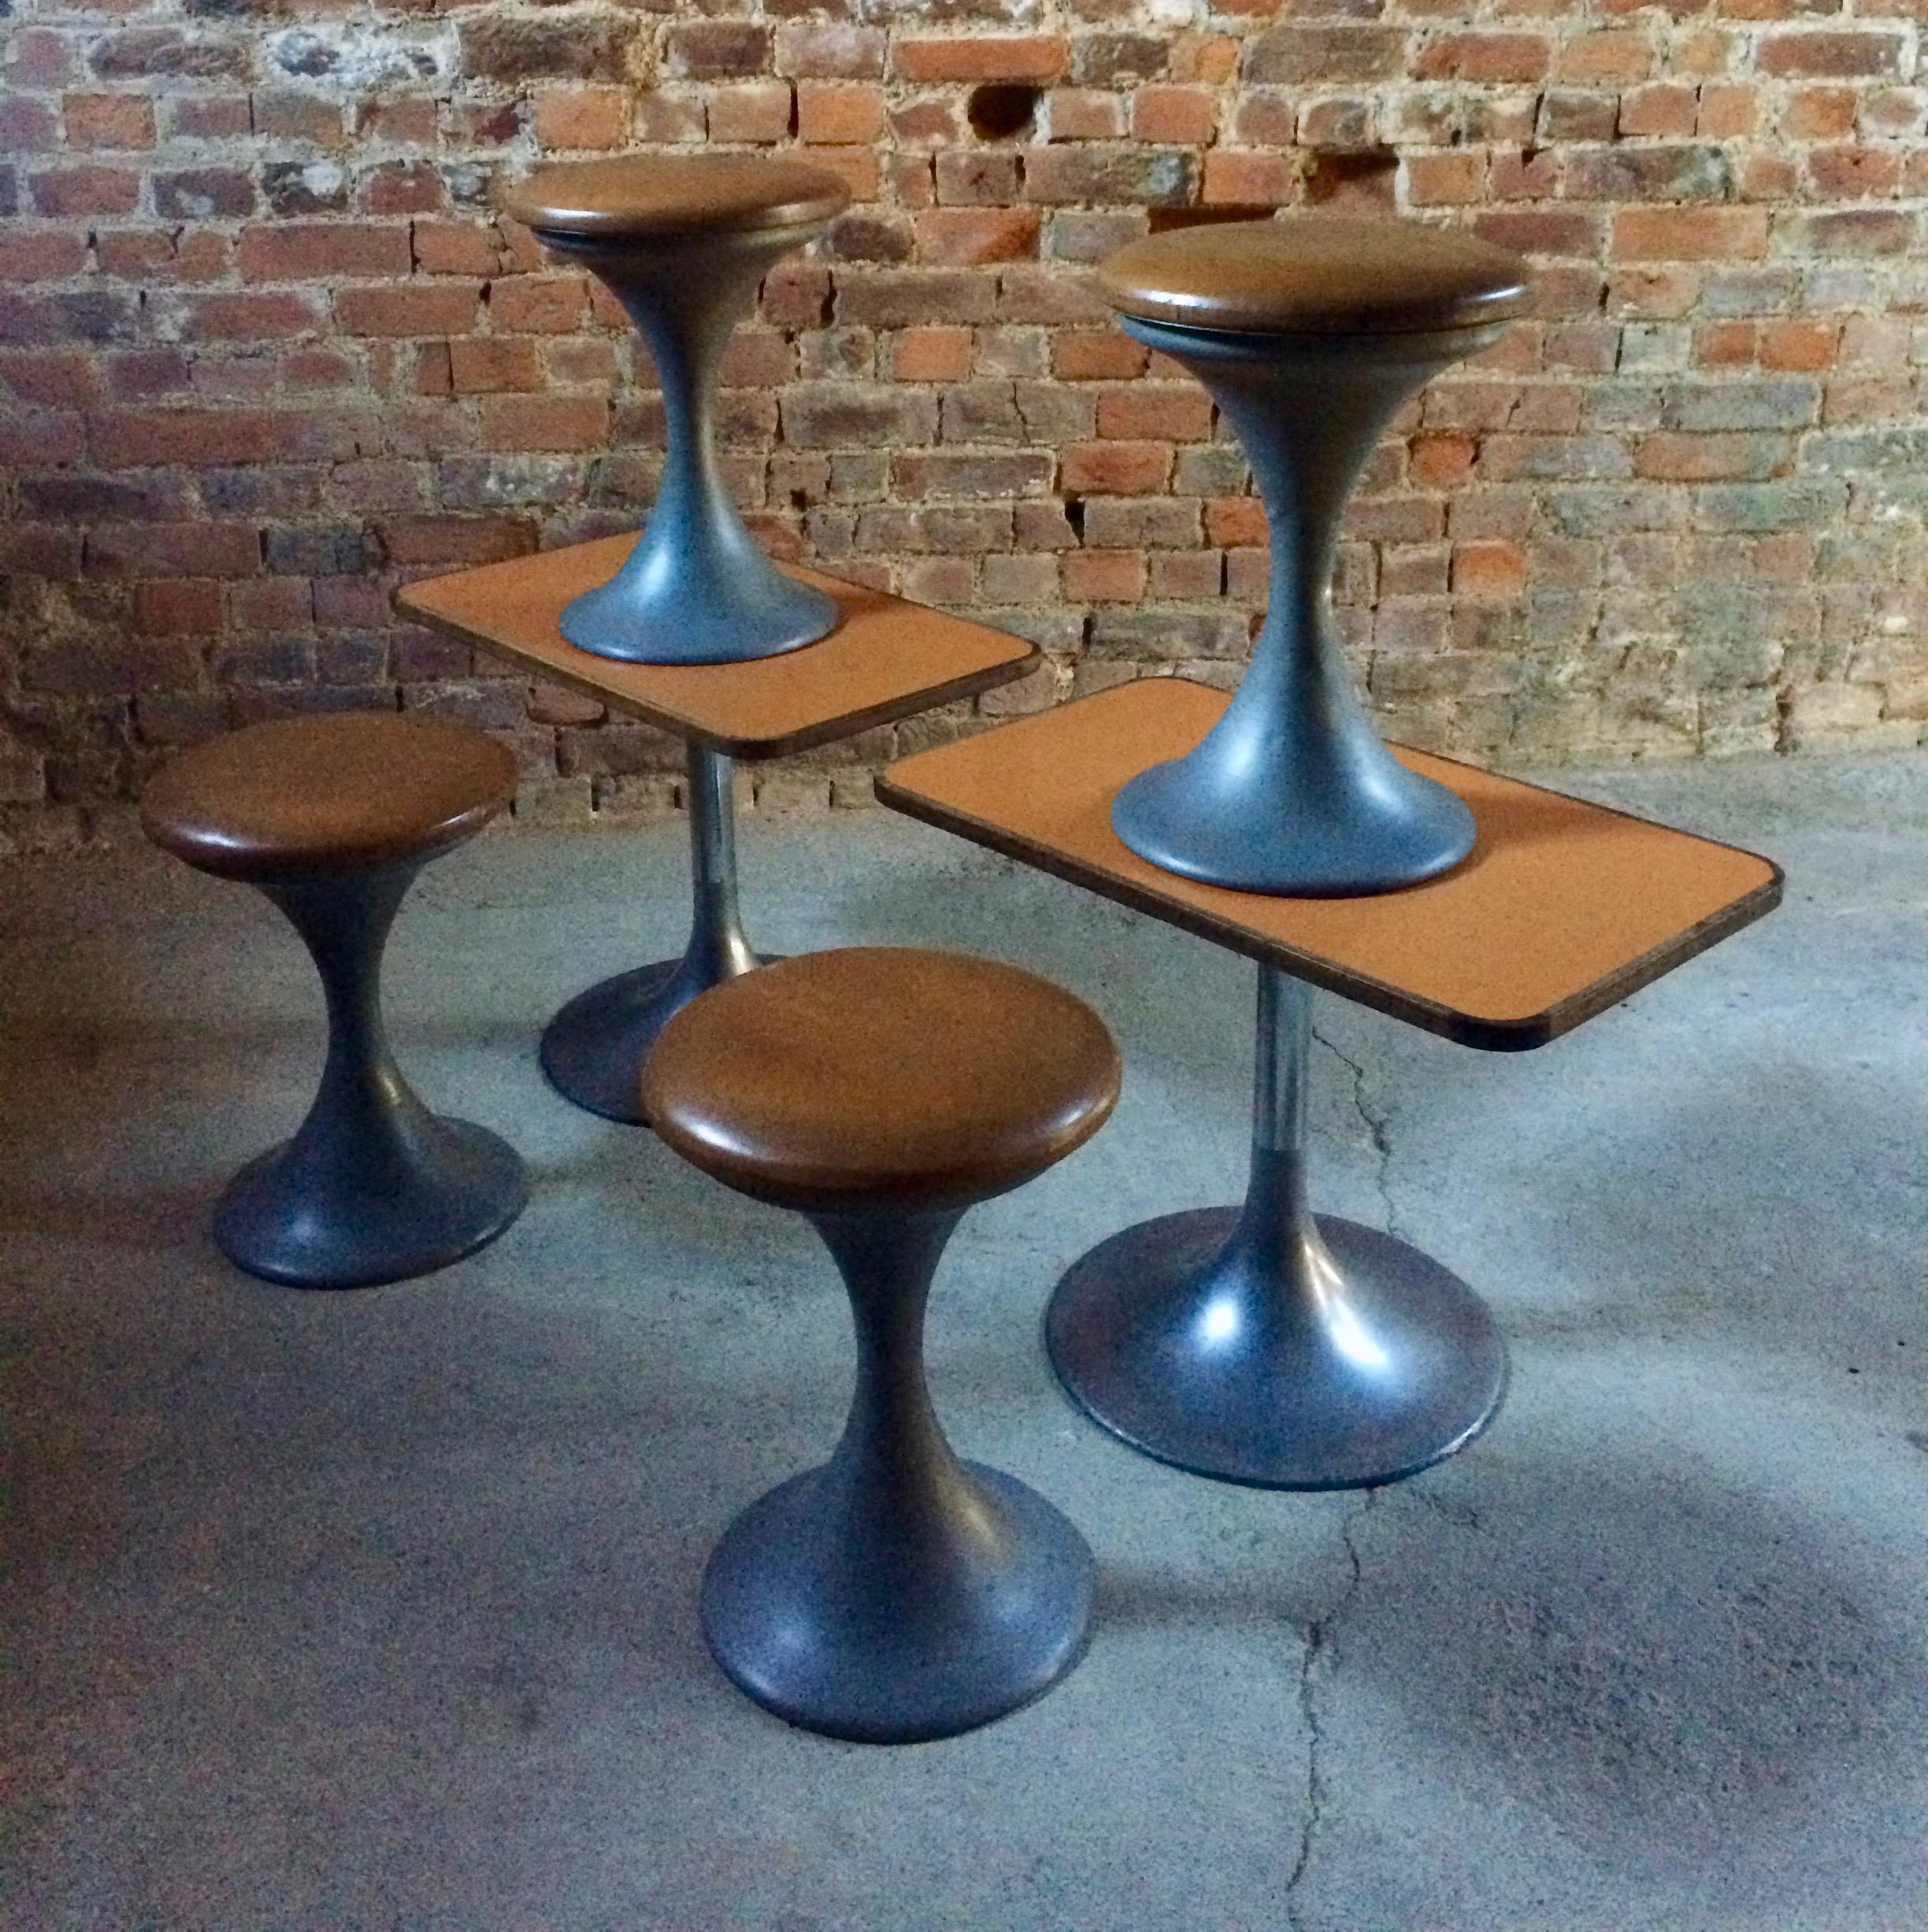 Fabulous midcentury Danish design bar or bistro set of two low tulip tables with formica tops and a matched set of four tulip stools, with brown leather seats and metal bases, circa 1960s.

Please note: The color of the stool bases are as shown in